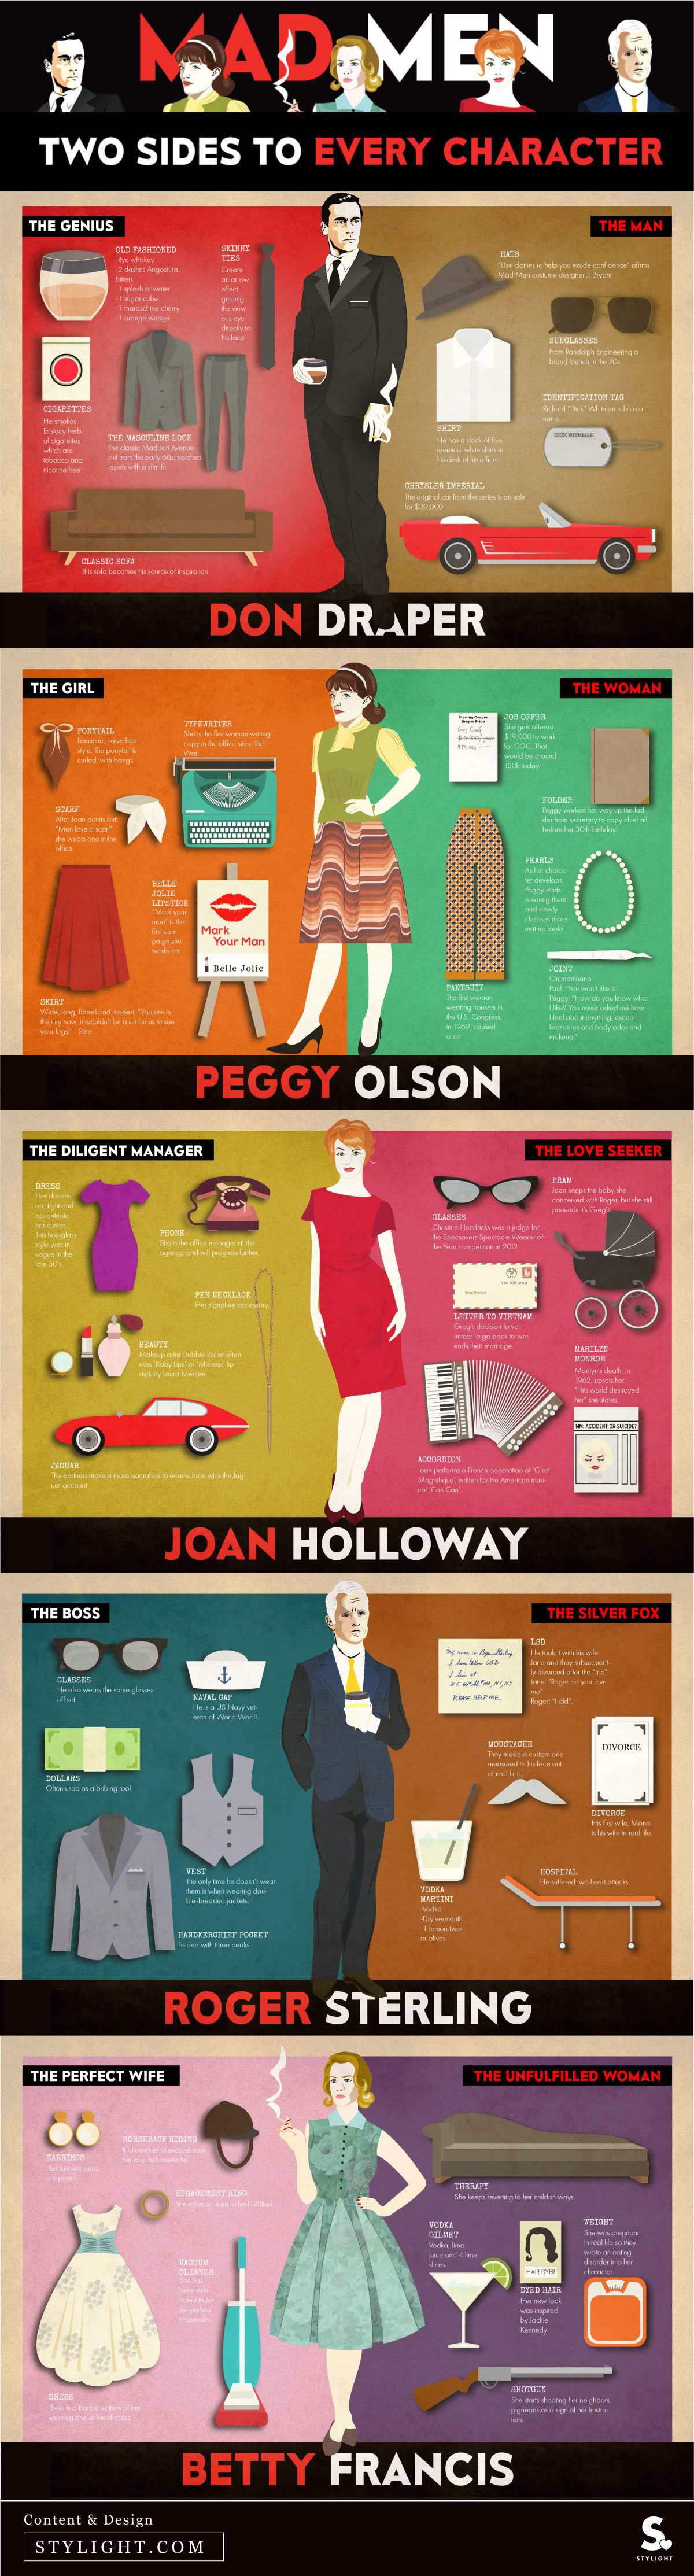 Mad Men: Two Sides To Every Character | Visual.ly